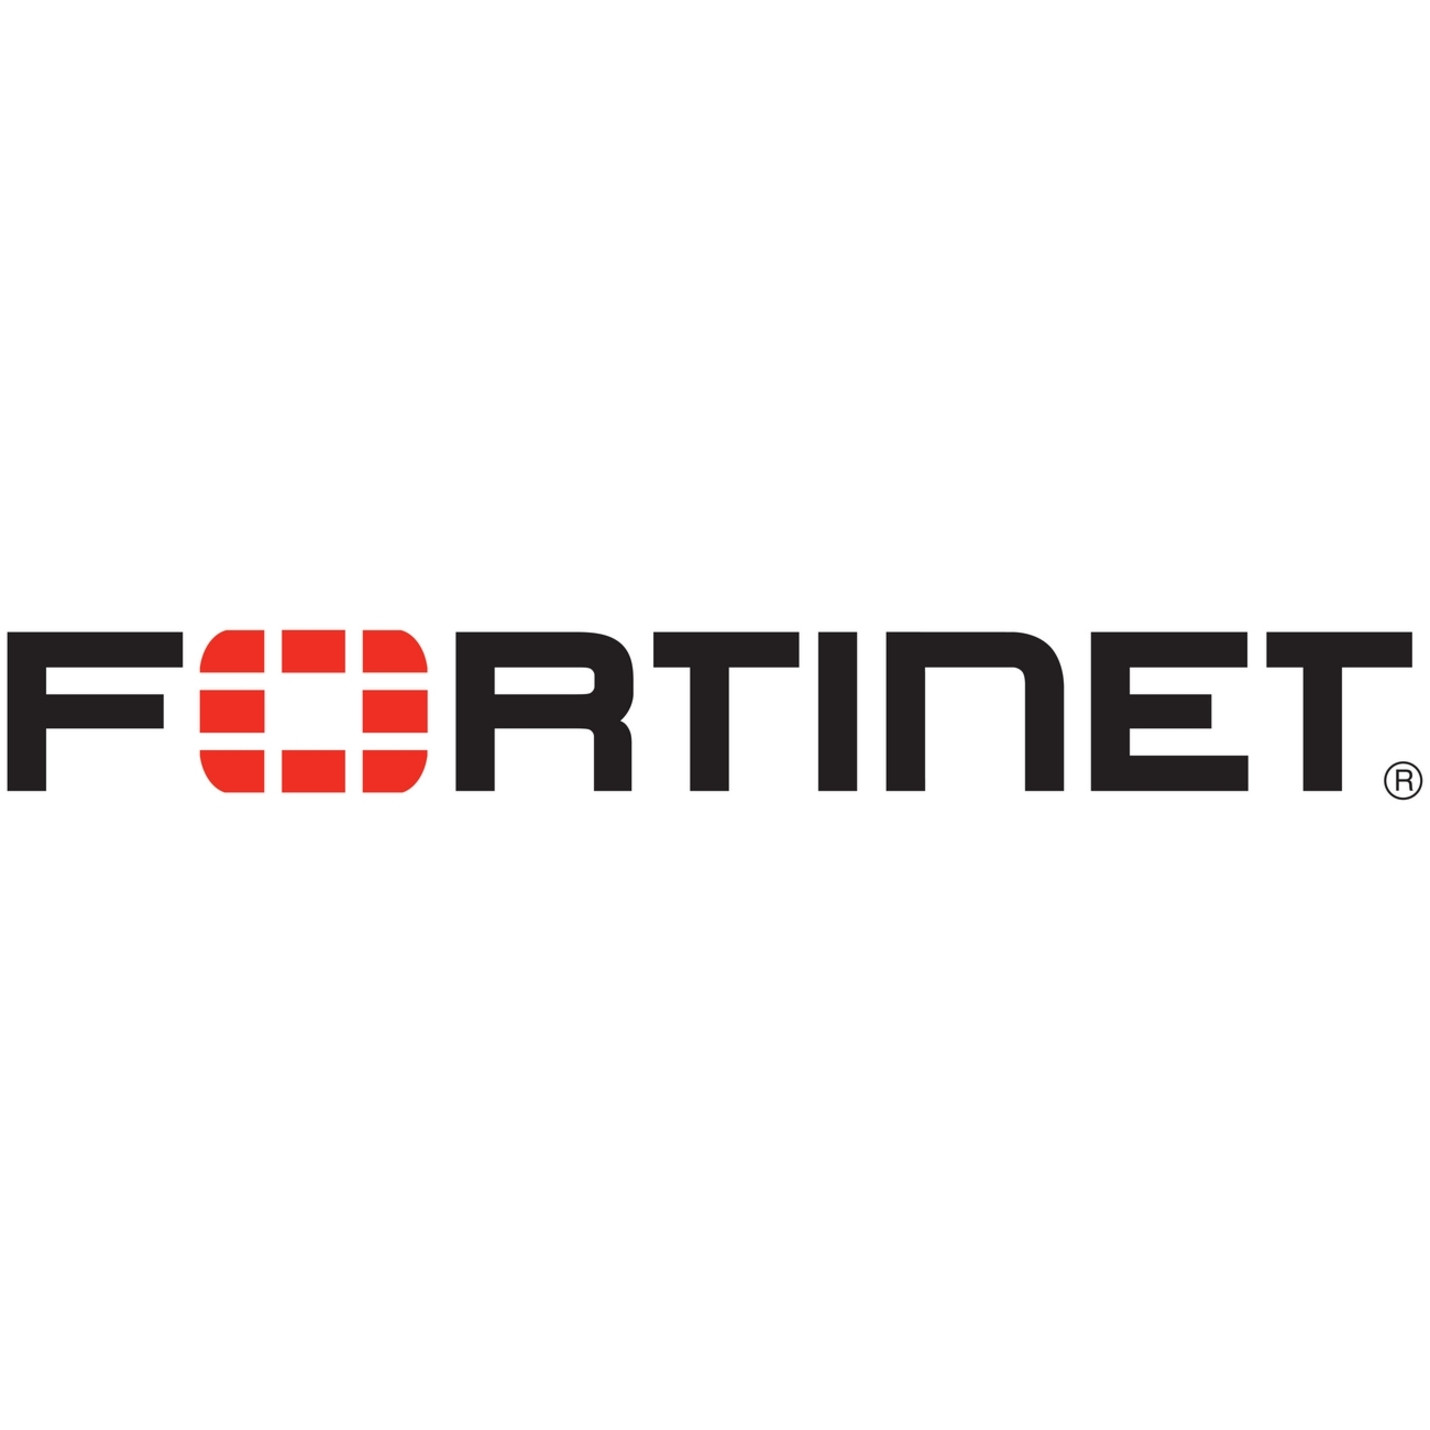 Fortinet Mounting Bracket for Network Security & Firewall Device SP-EAR-FG310B